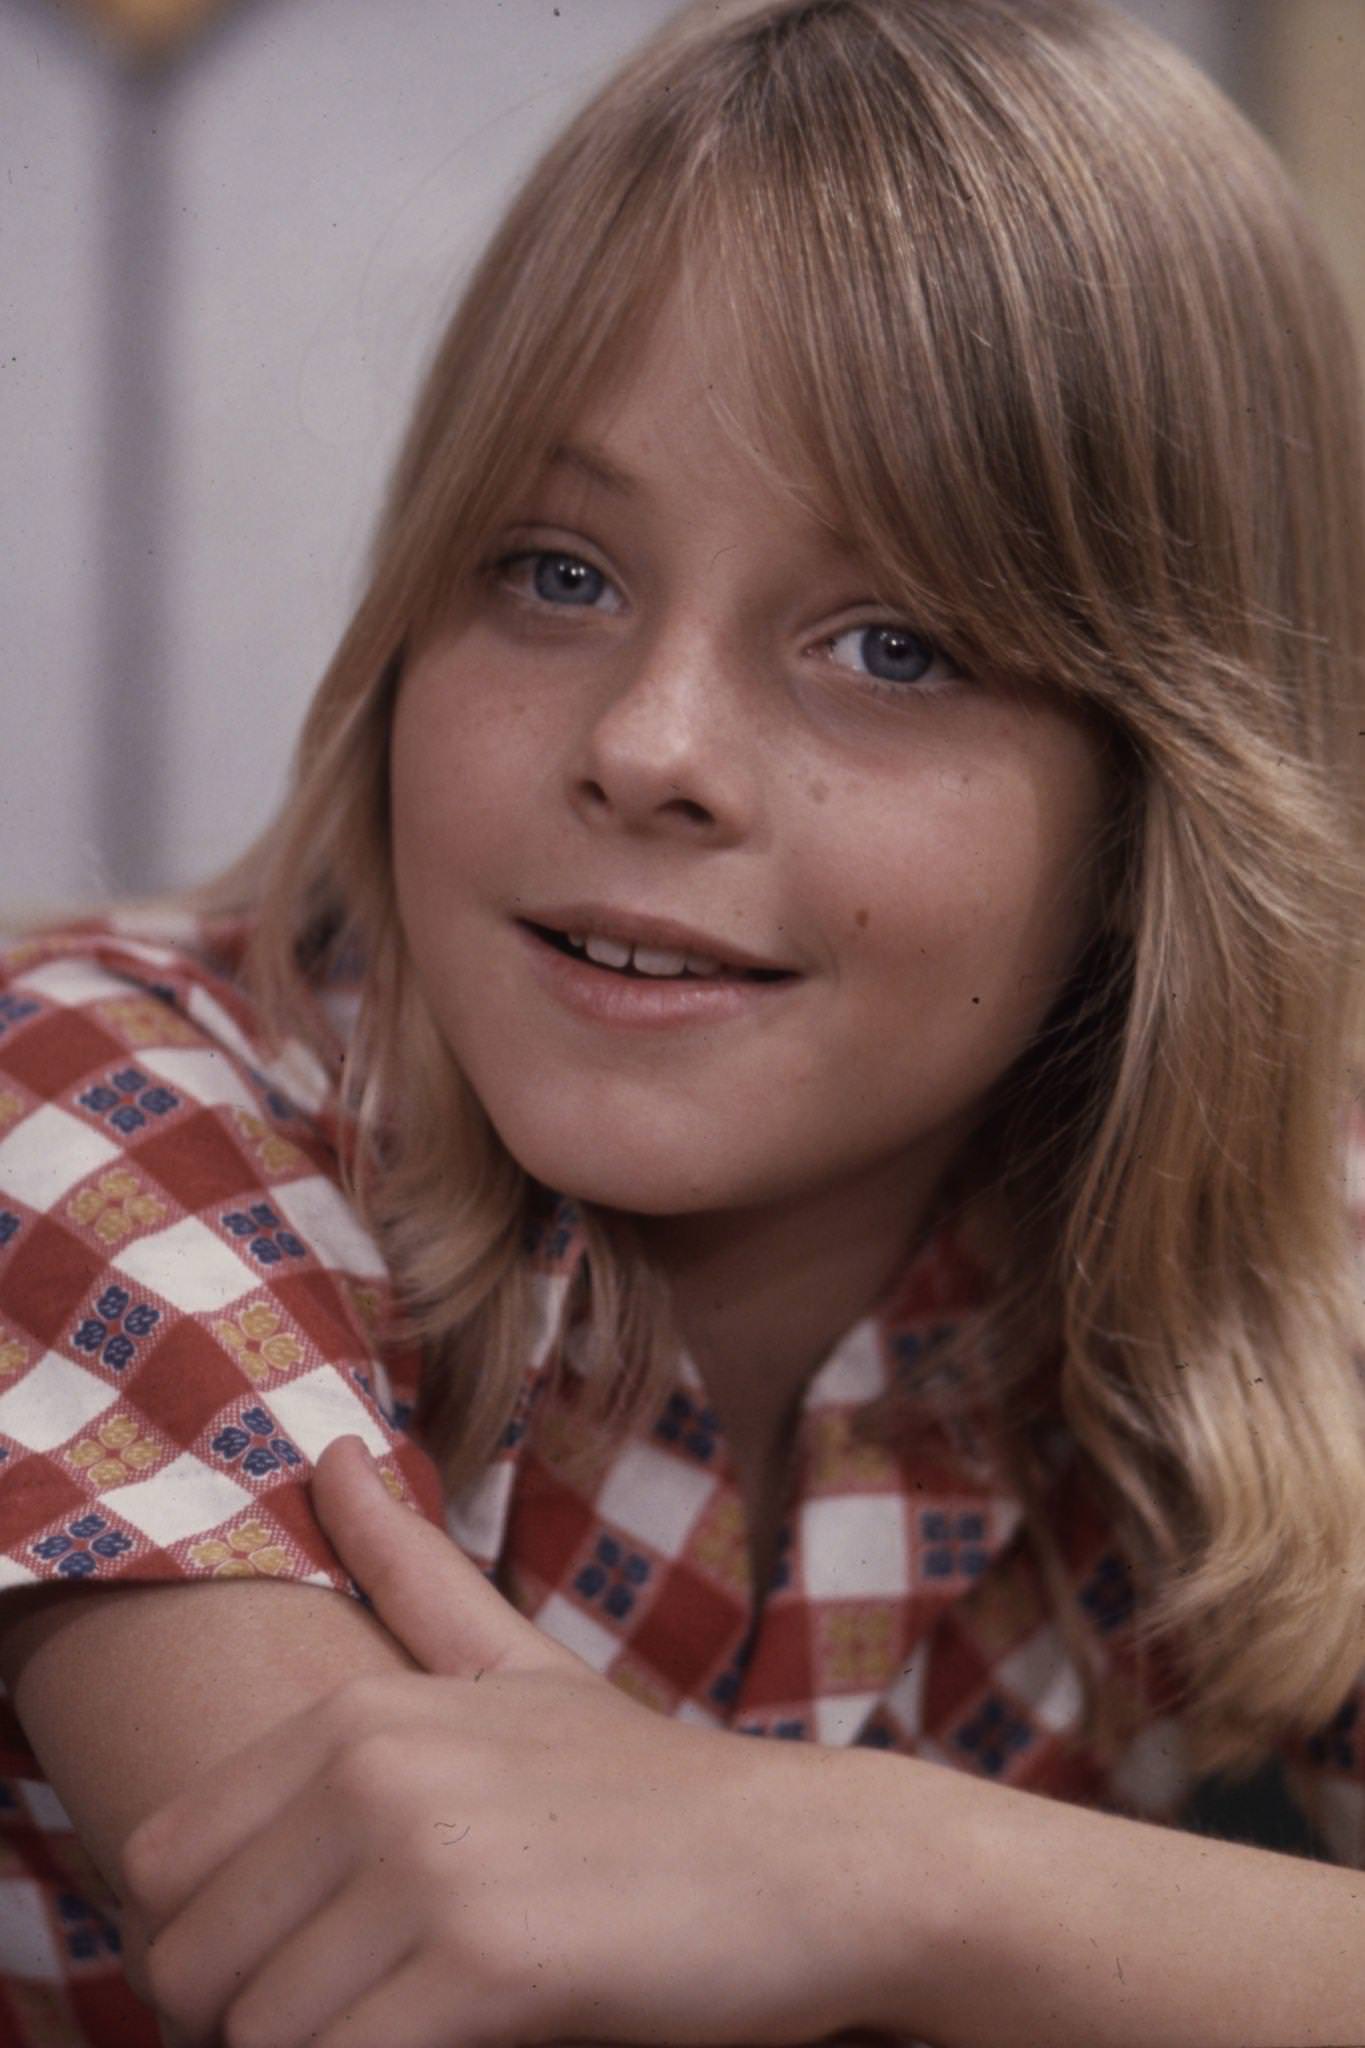 Jodie Foster appearing in 'Bob & Carol & Ted & Alice', 1973.